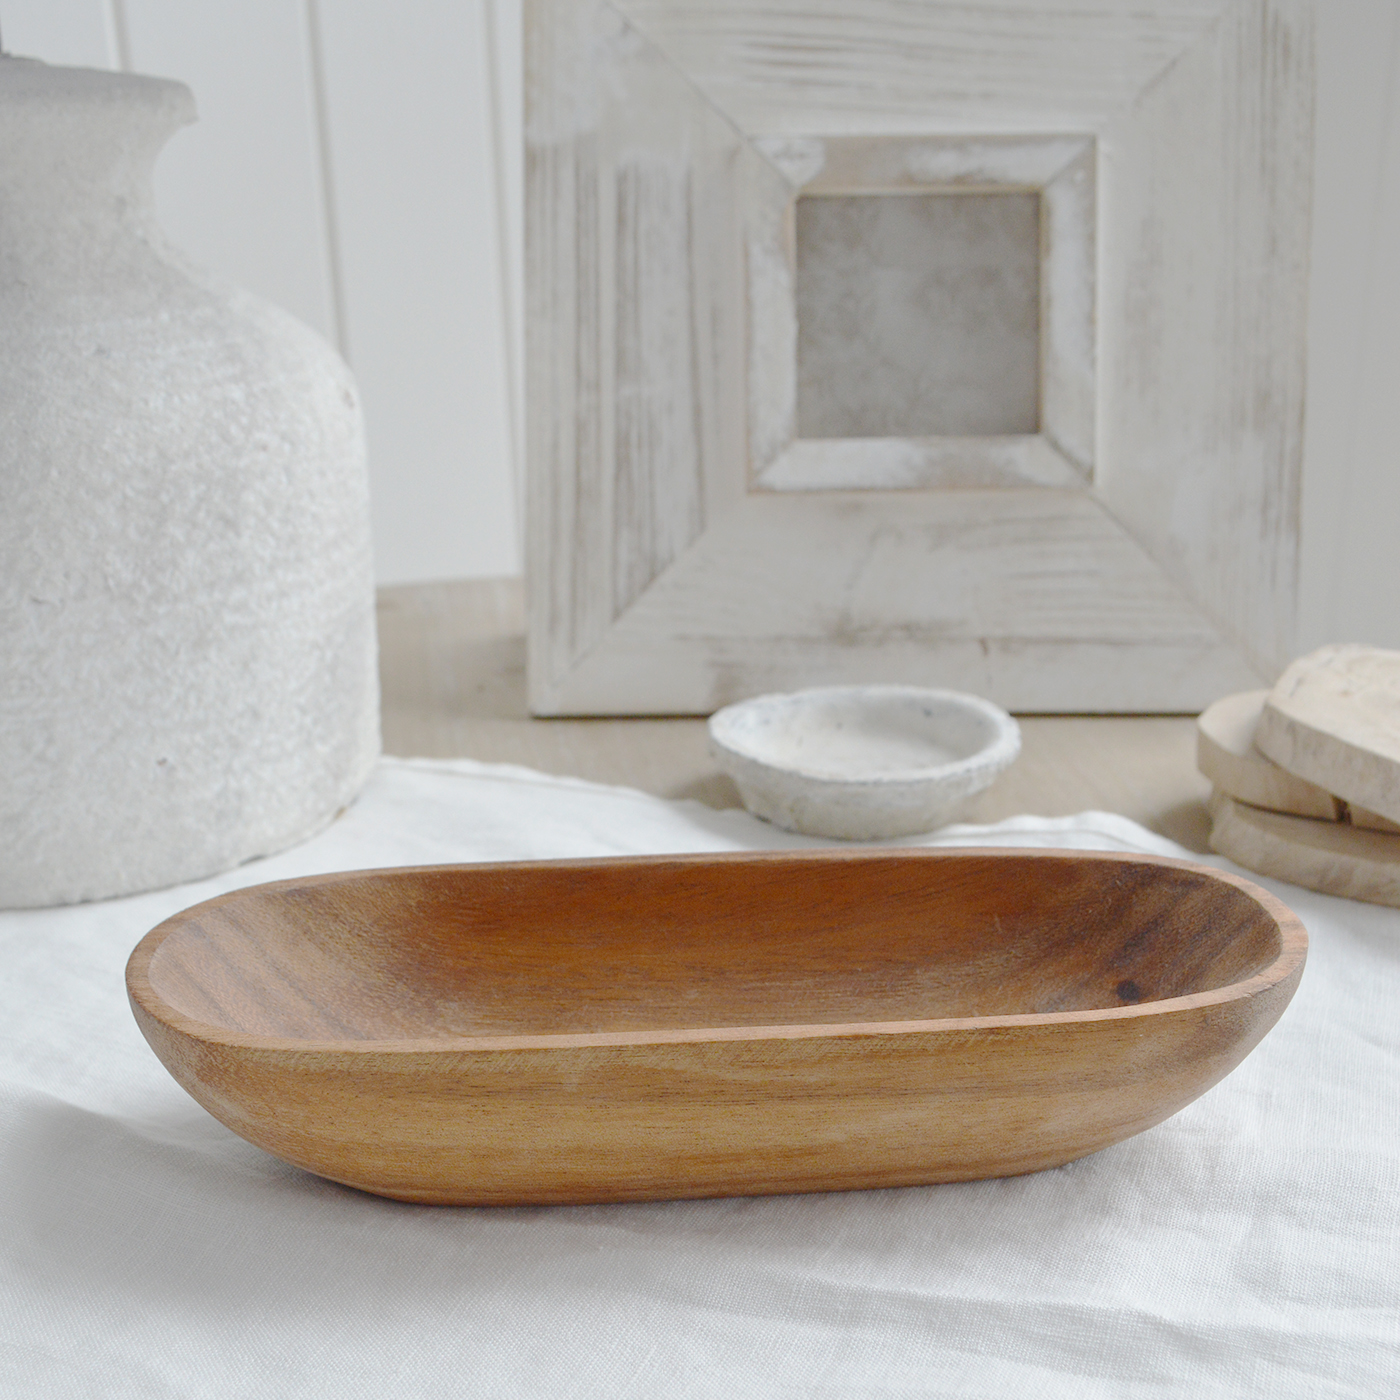 White Coastal Furniture and accessories for the home. Small deep Tisbury Tray for New England, farmhouse,  Country and coastal homes and interior decor